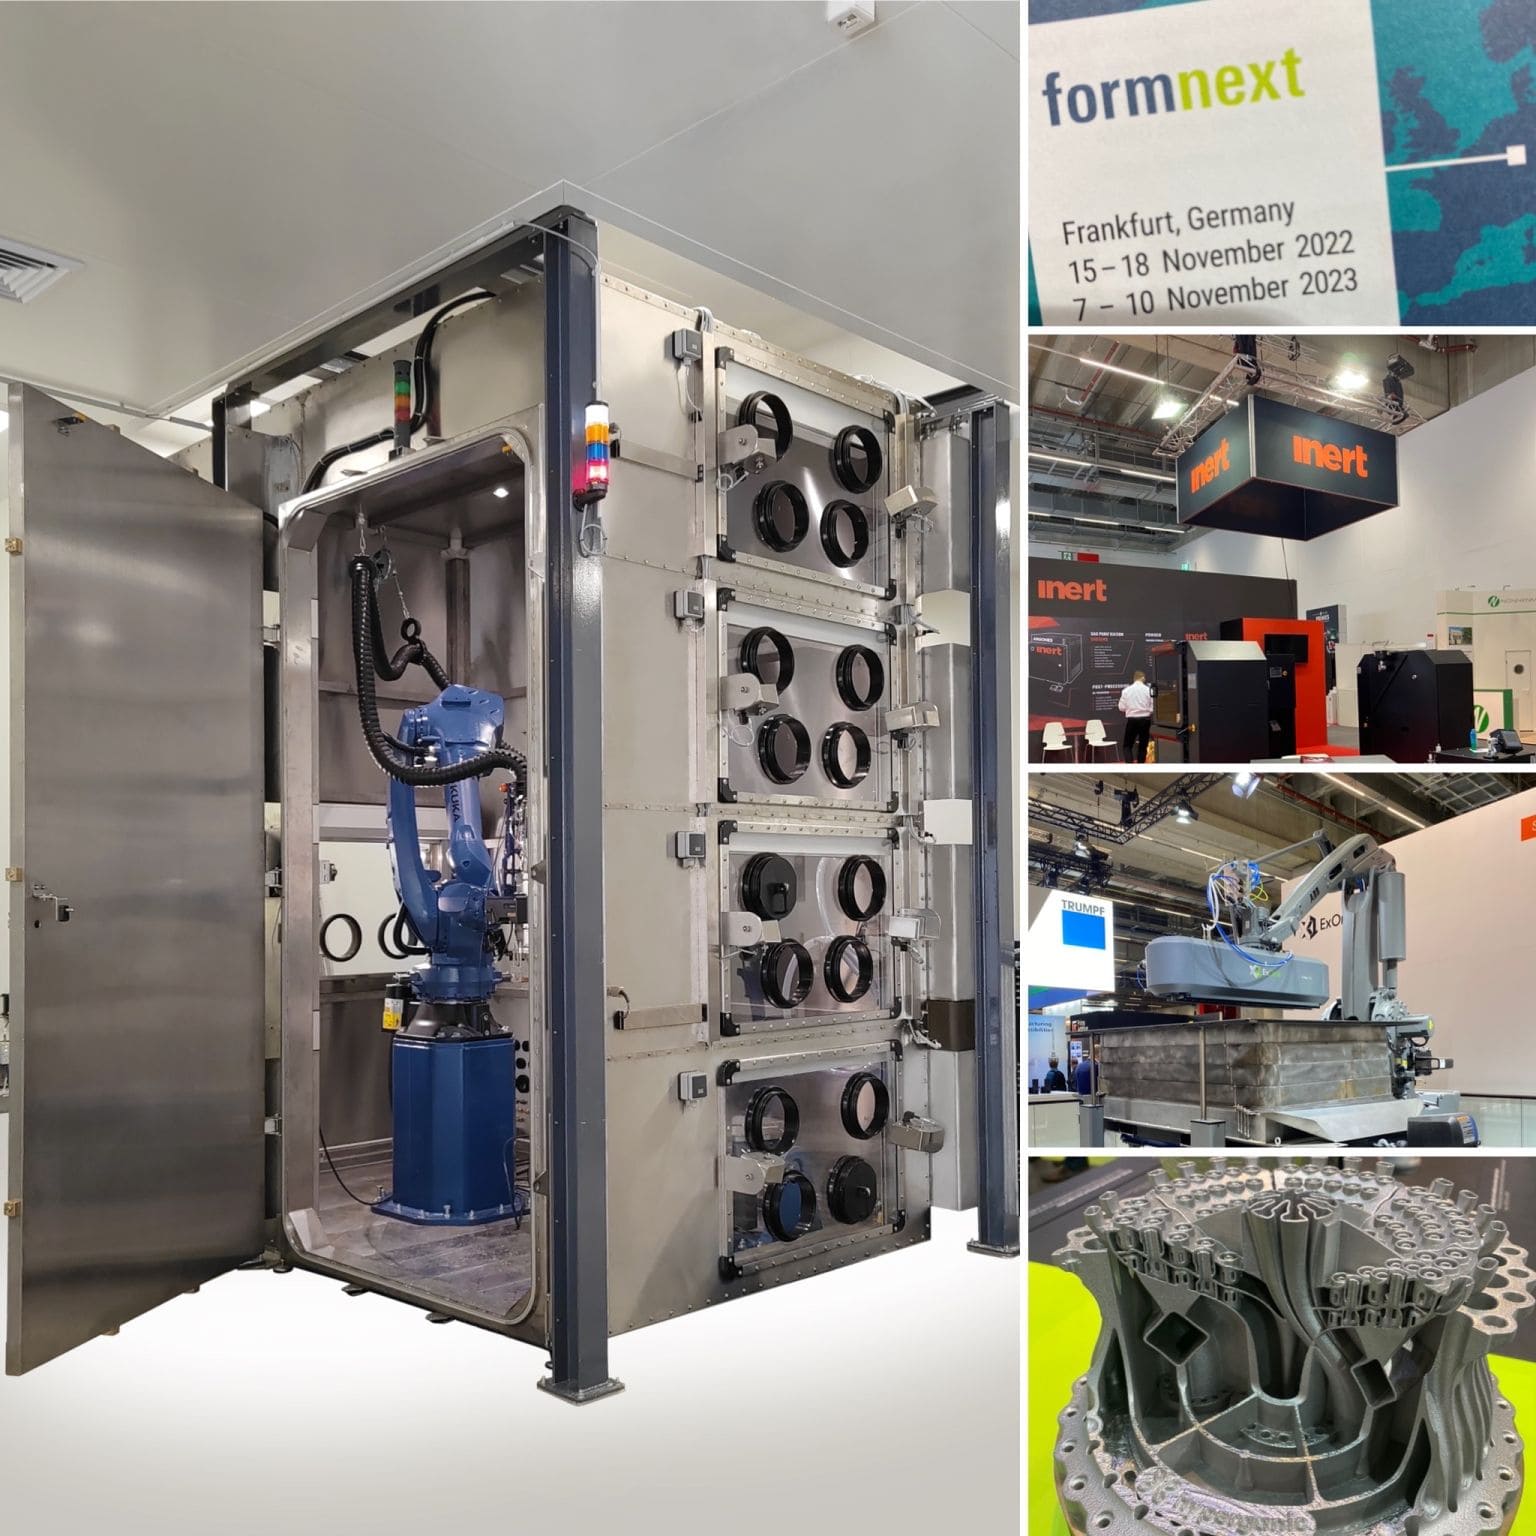 The Gloveboxes Group is attending Formnext 2022